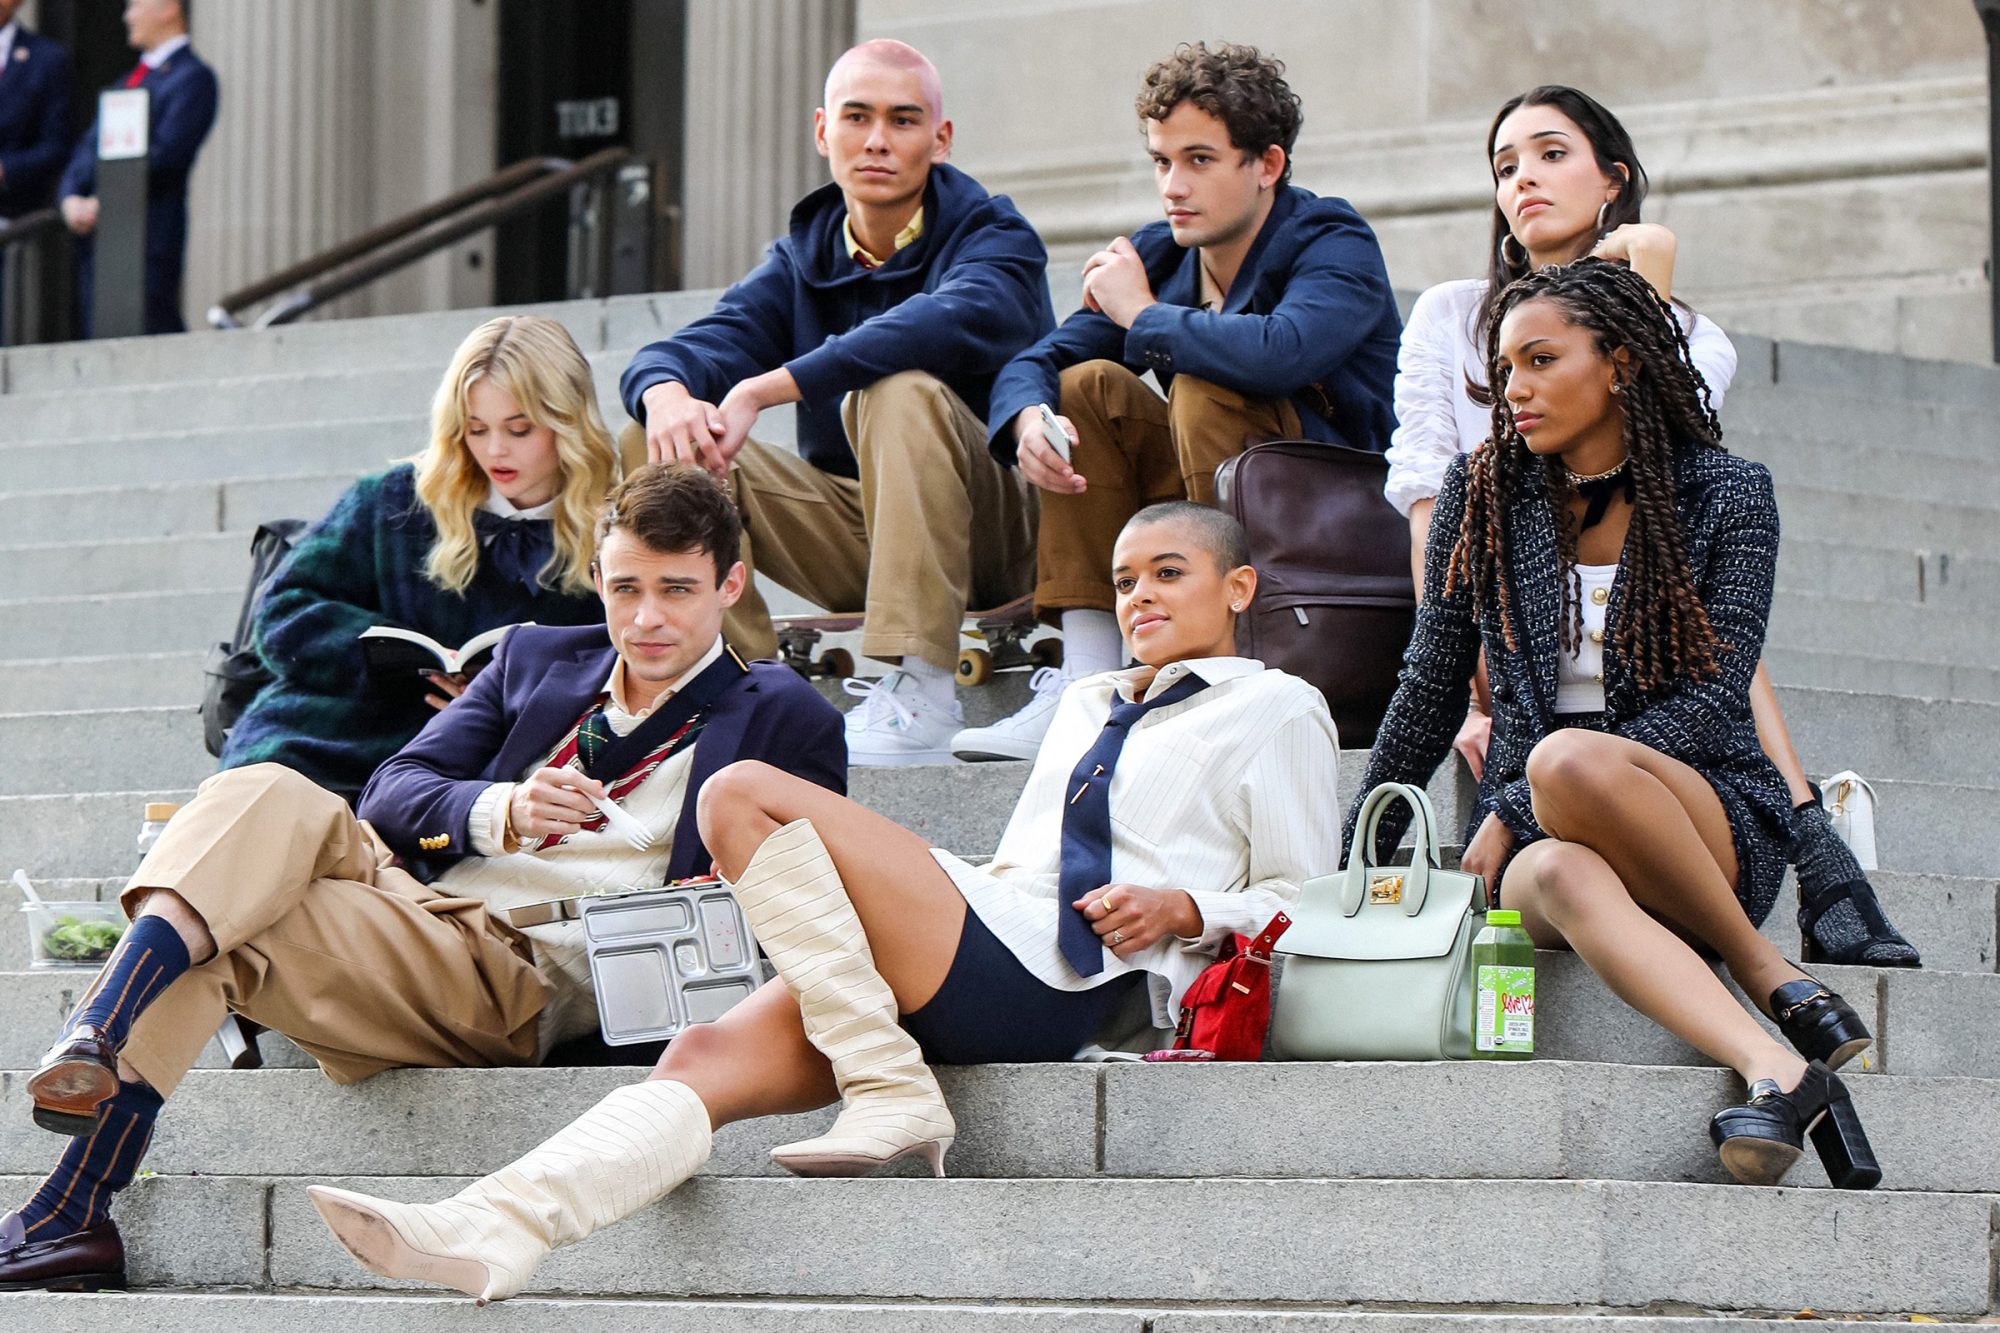 Gossip Girl, Episode 1: “Just Another Girl on the MTA” Brings Us Back To Constance Billard, But We Are Off To A Clumsy Start – Recap